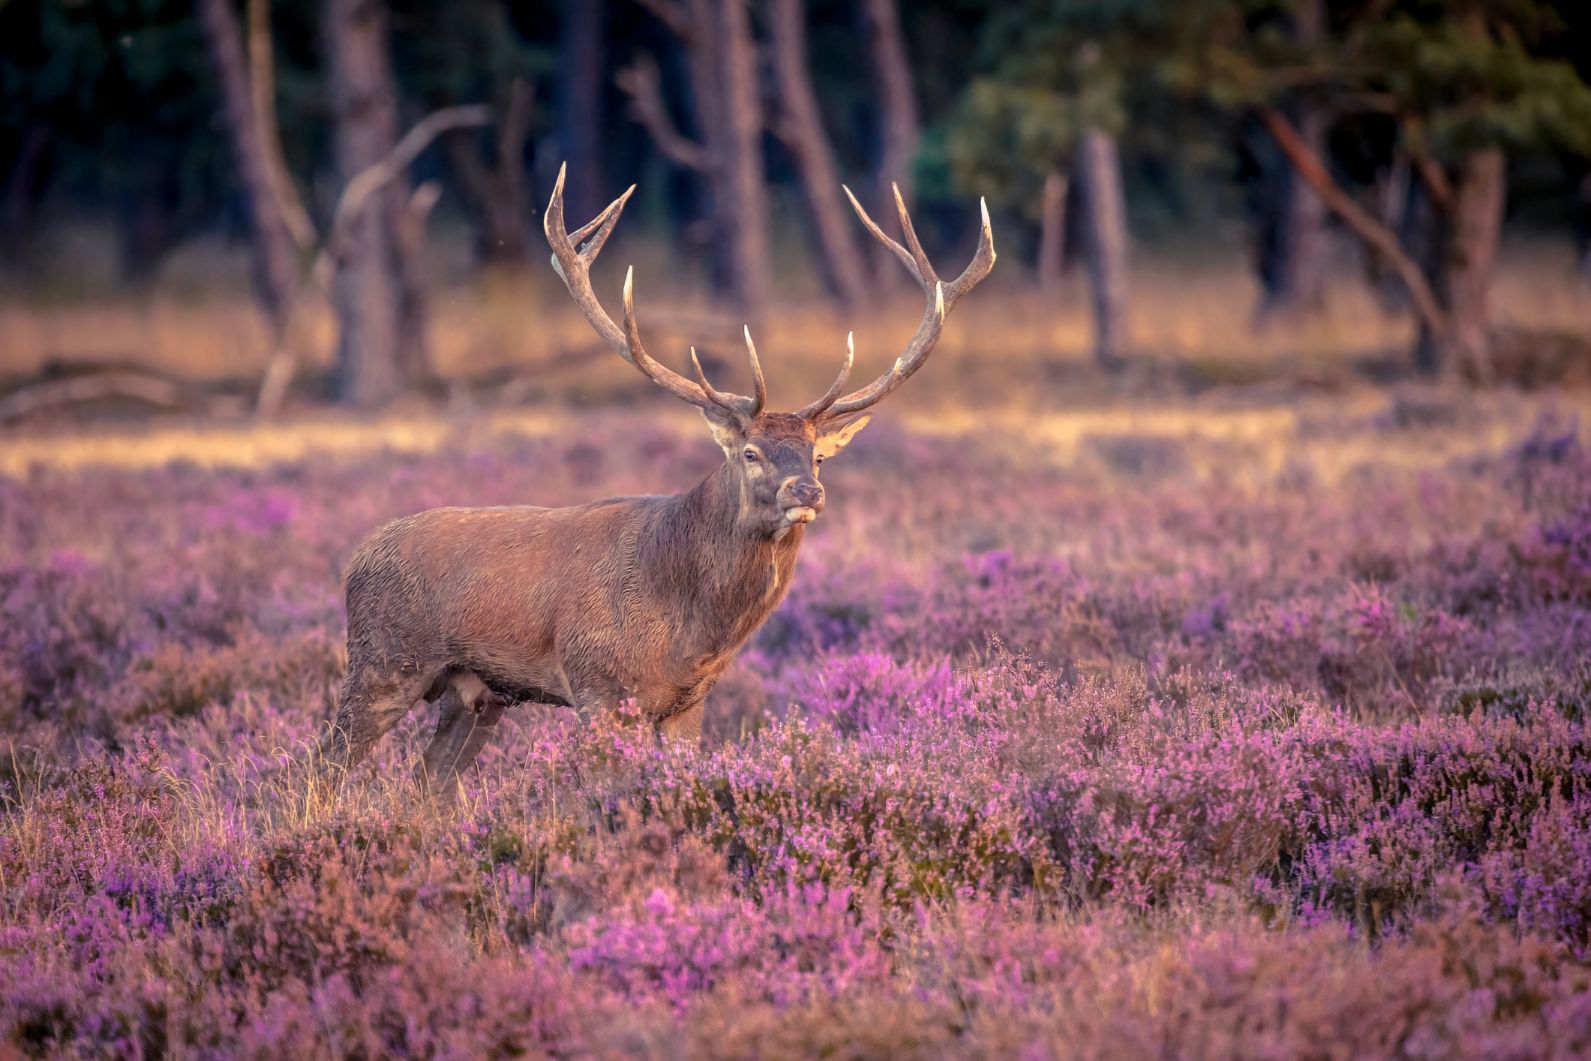 A stag in the heather fields of Hoge Veluwe, the Netherlands.